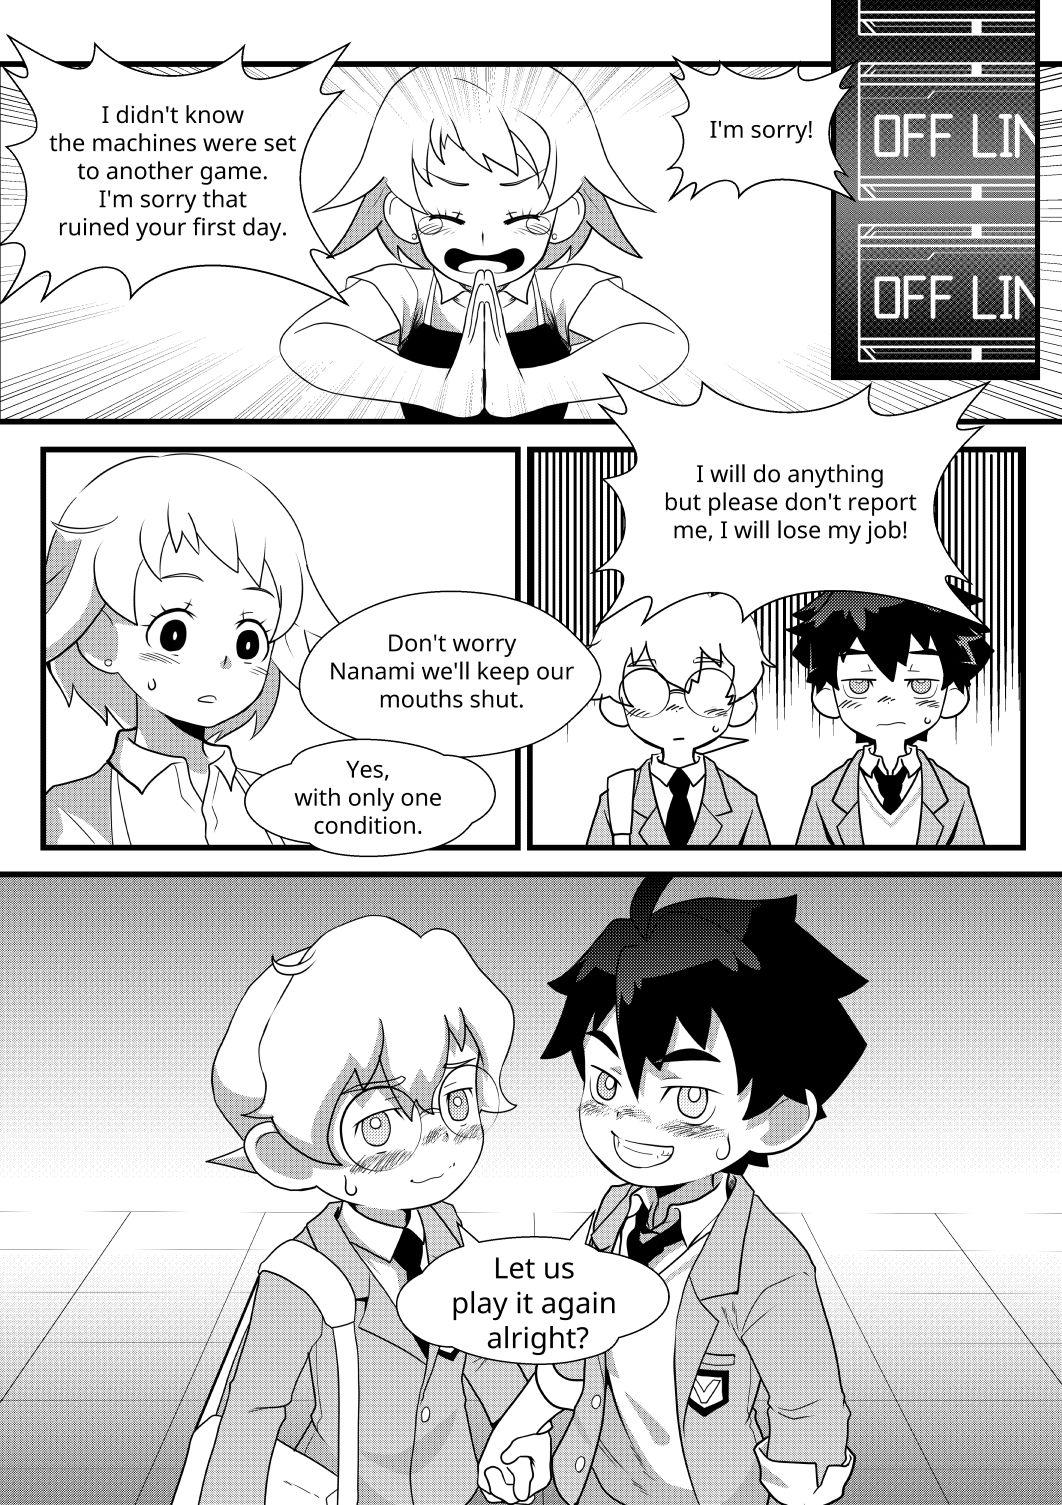 Humiliation Welcome to GBN - Gundam build divers Gonzo - Page 22